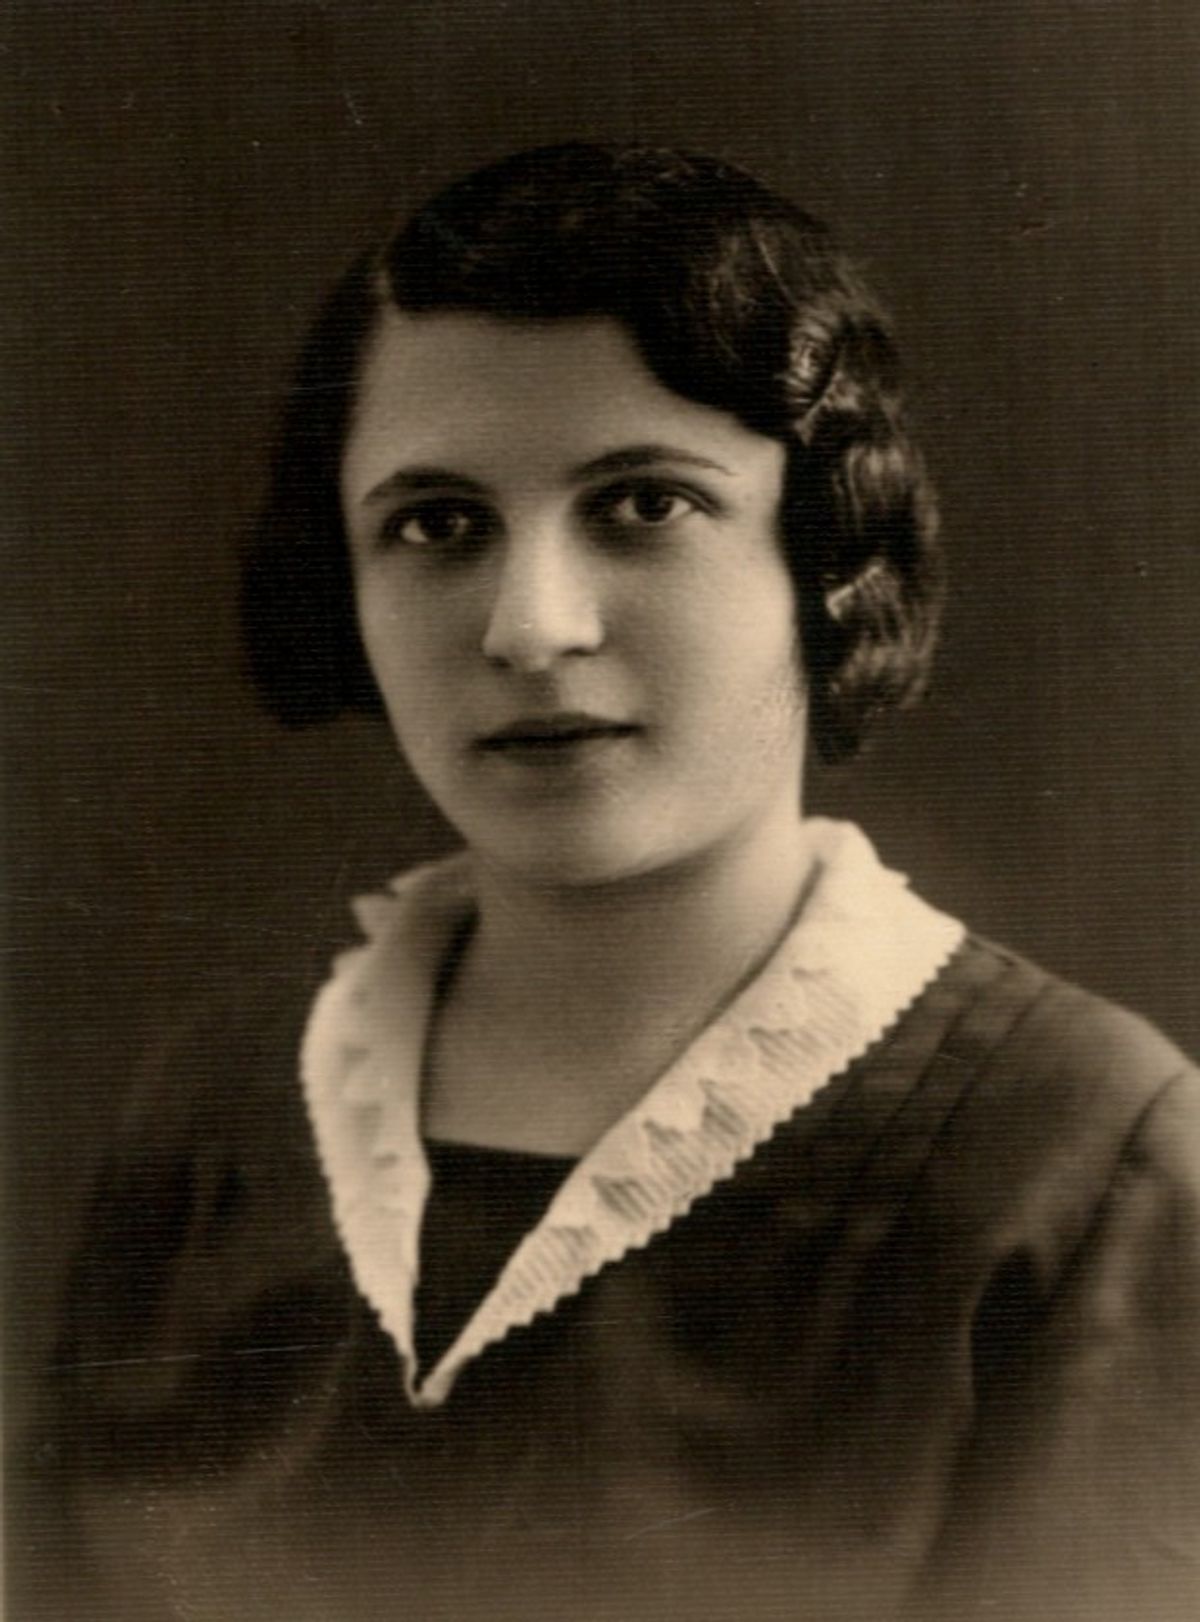 Sara Henkin. Courtesy of Lithuanian State Central Archive.